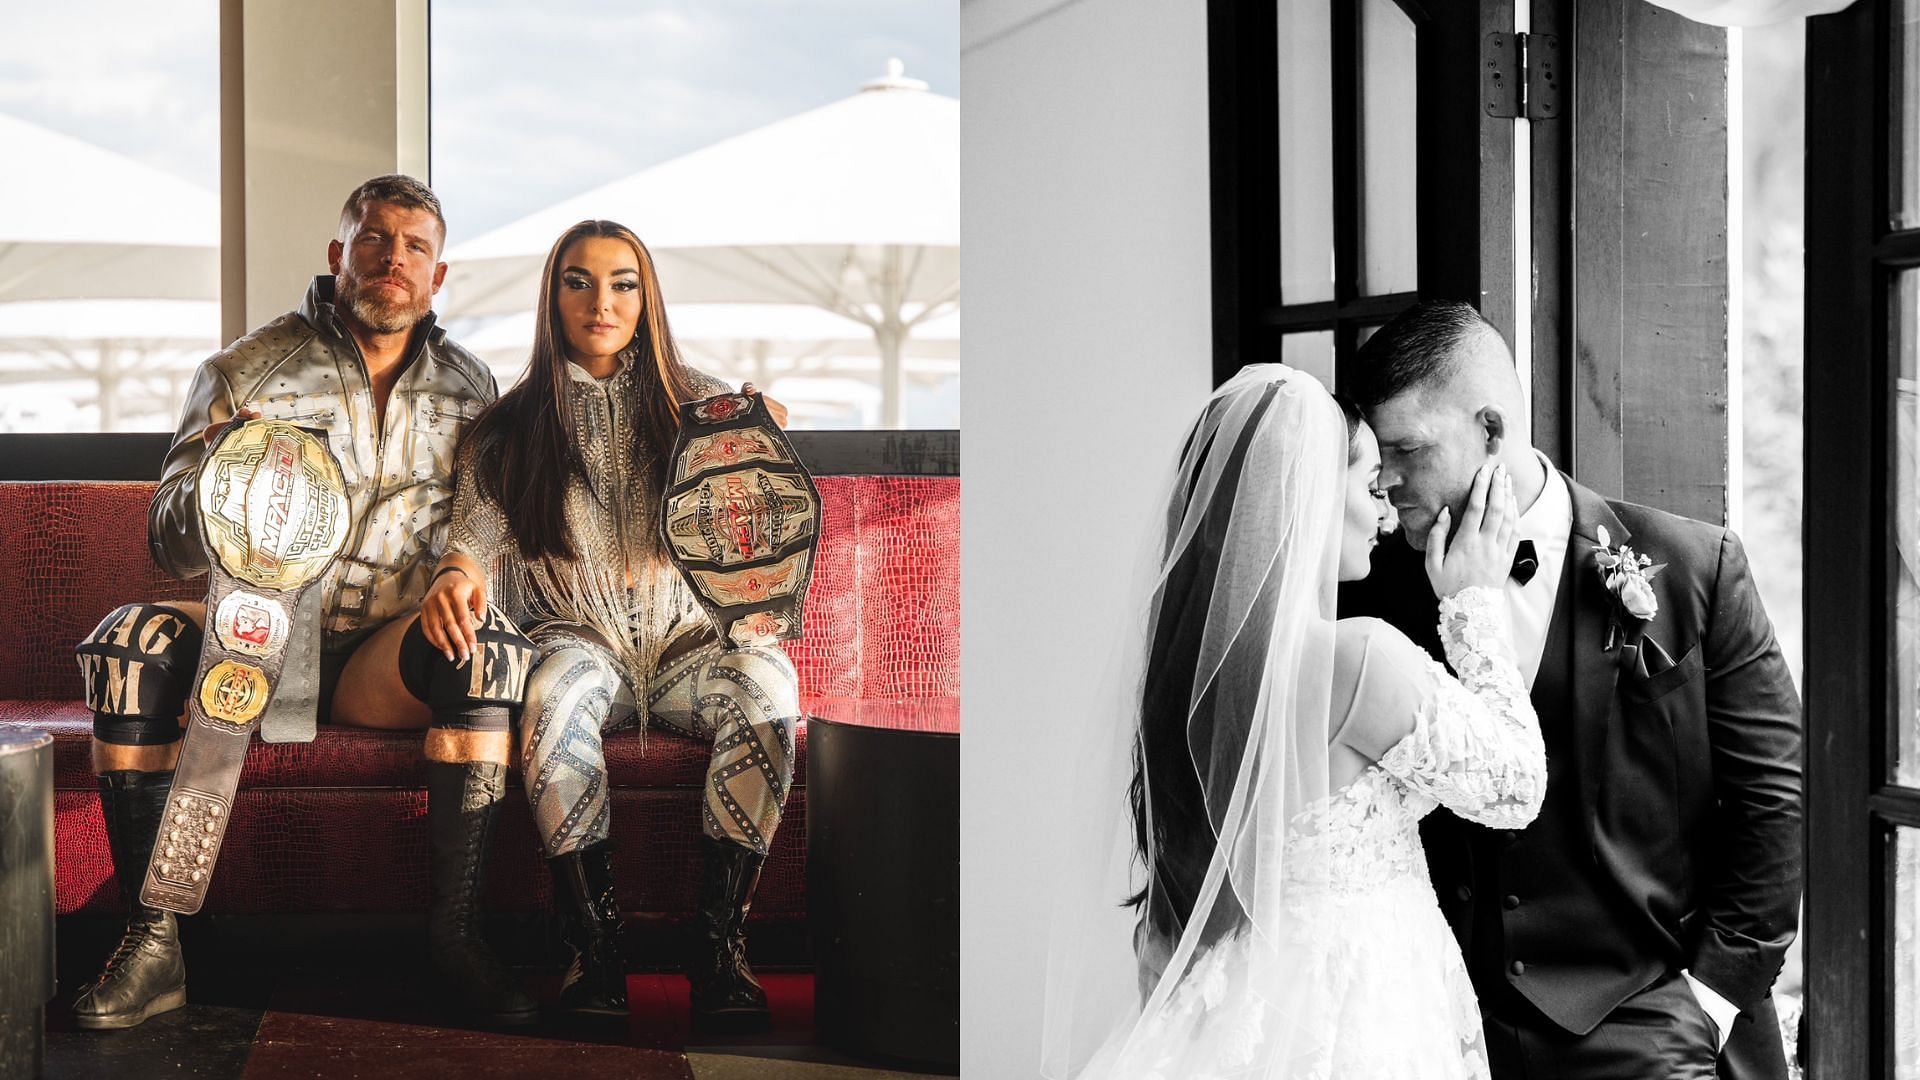 Steve Maclin and Deonna Purrazzo are on top of the world in the ring and in life